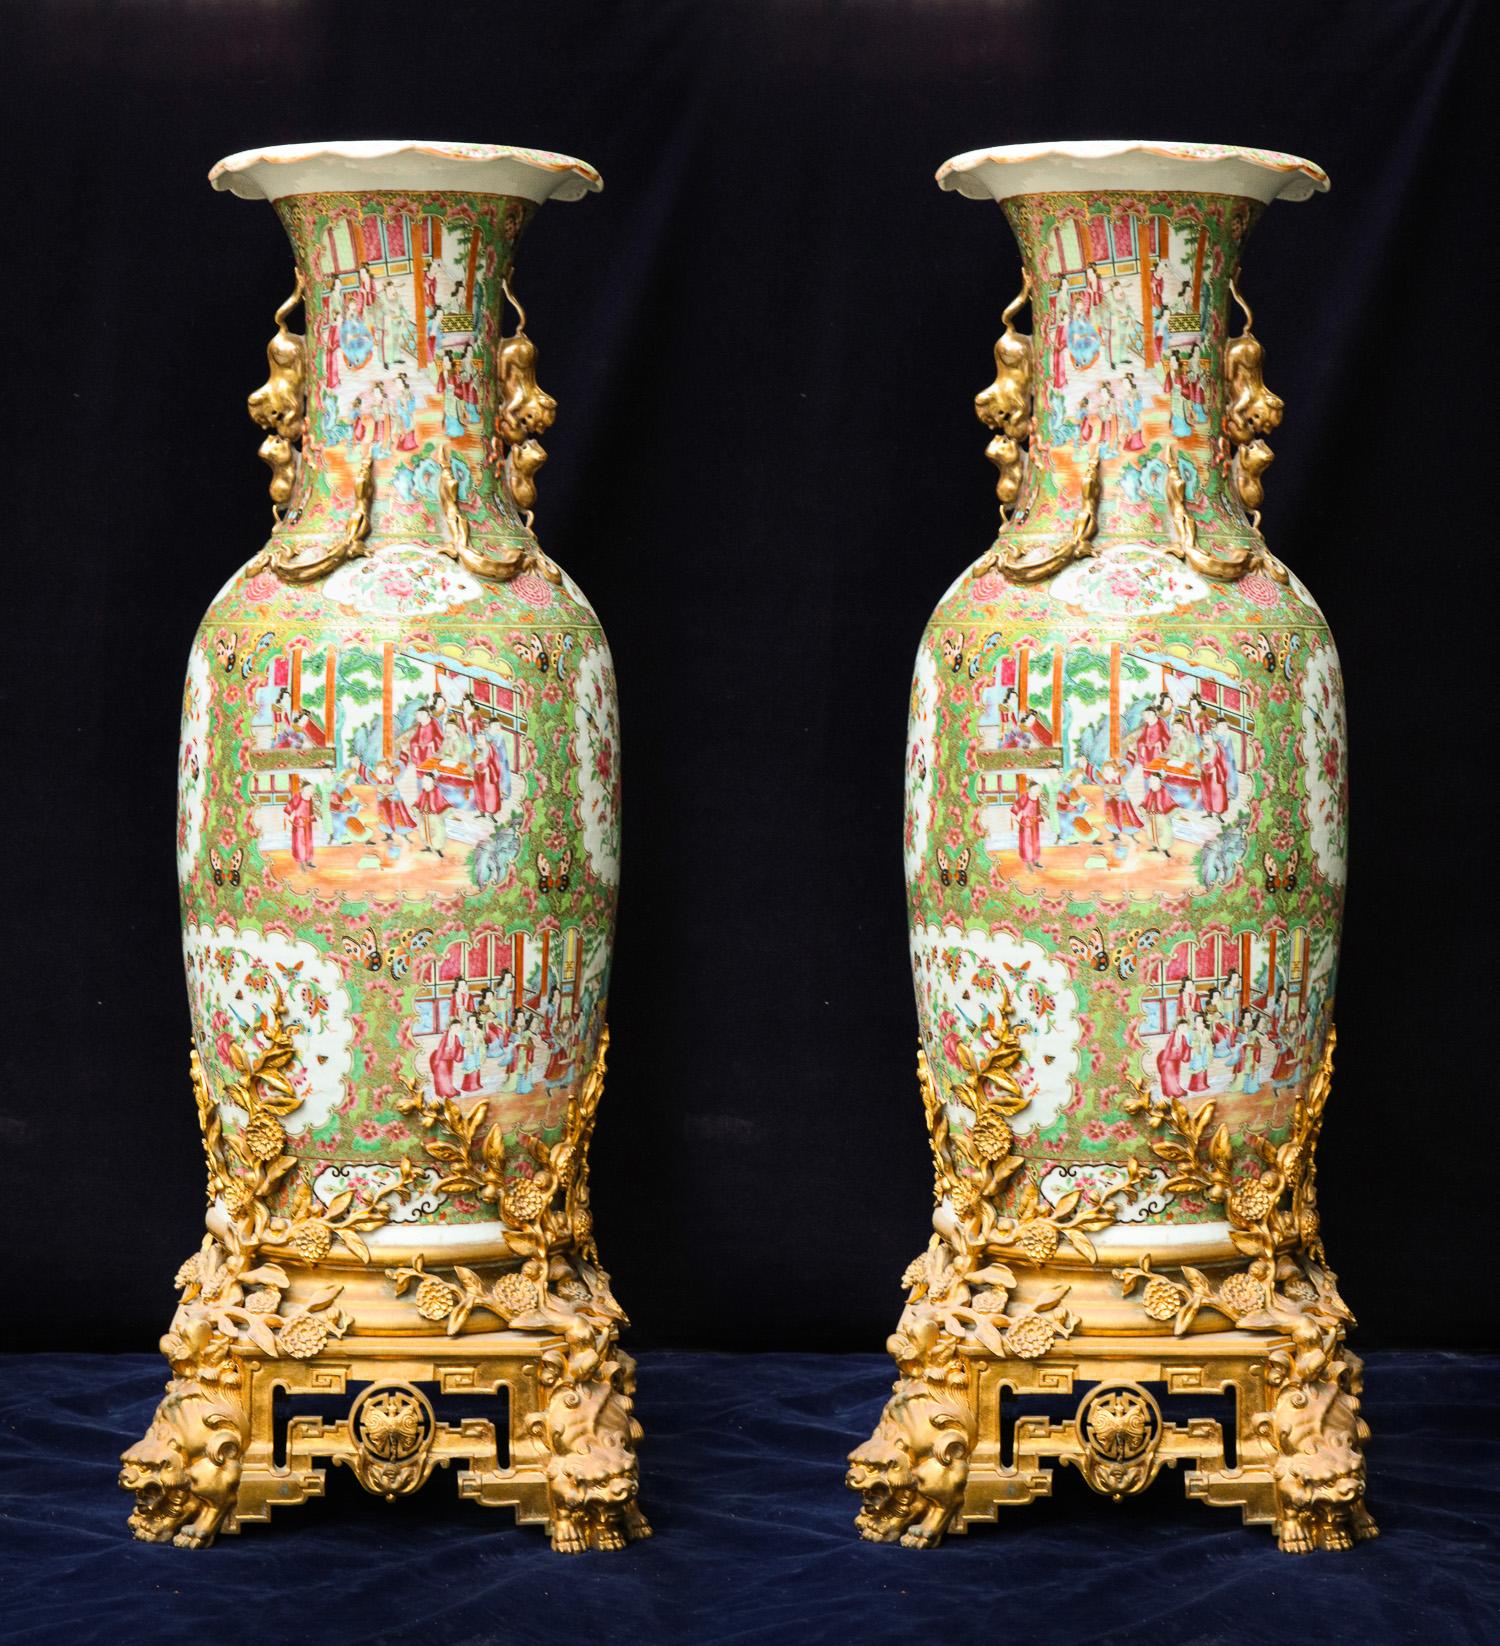 A pair of palatial and highly important chinoiserie style large gilt bronze-mounted Chinese export Famille rose hand-painted polychromed enameled and gilded vases of exquisite craftsmanship embellished on spectacular gilt bronze bases attributed to